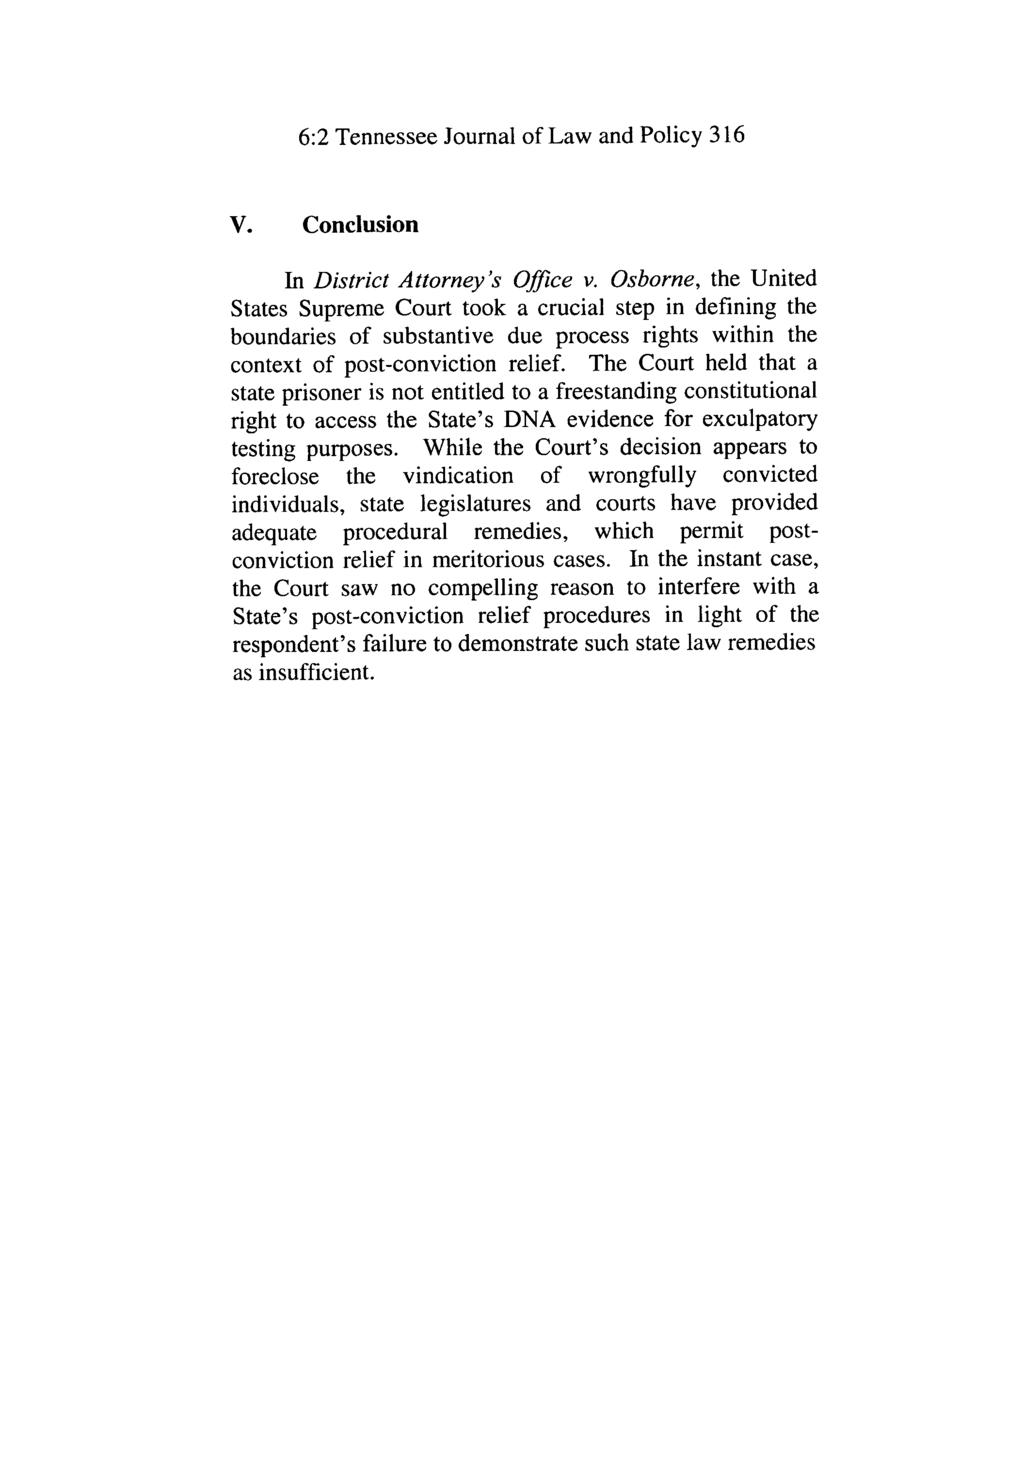 Tennessee Journal of Law and Policy, Vol. 6, Iss. 2 [2014], Art. 8 6:2 Tennessee Journal of Law and Policy 316 V. Conclusion In District Attorney's Office v.